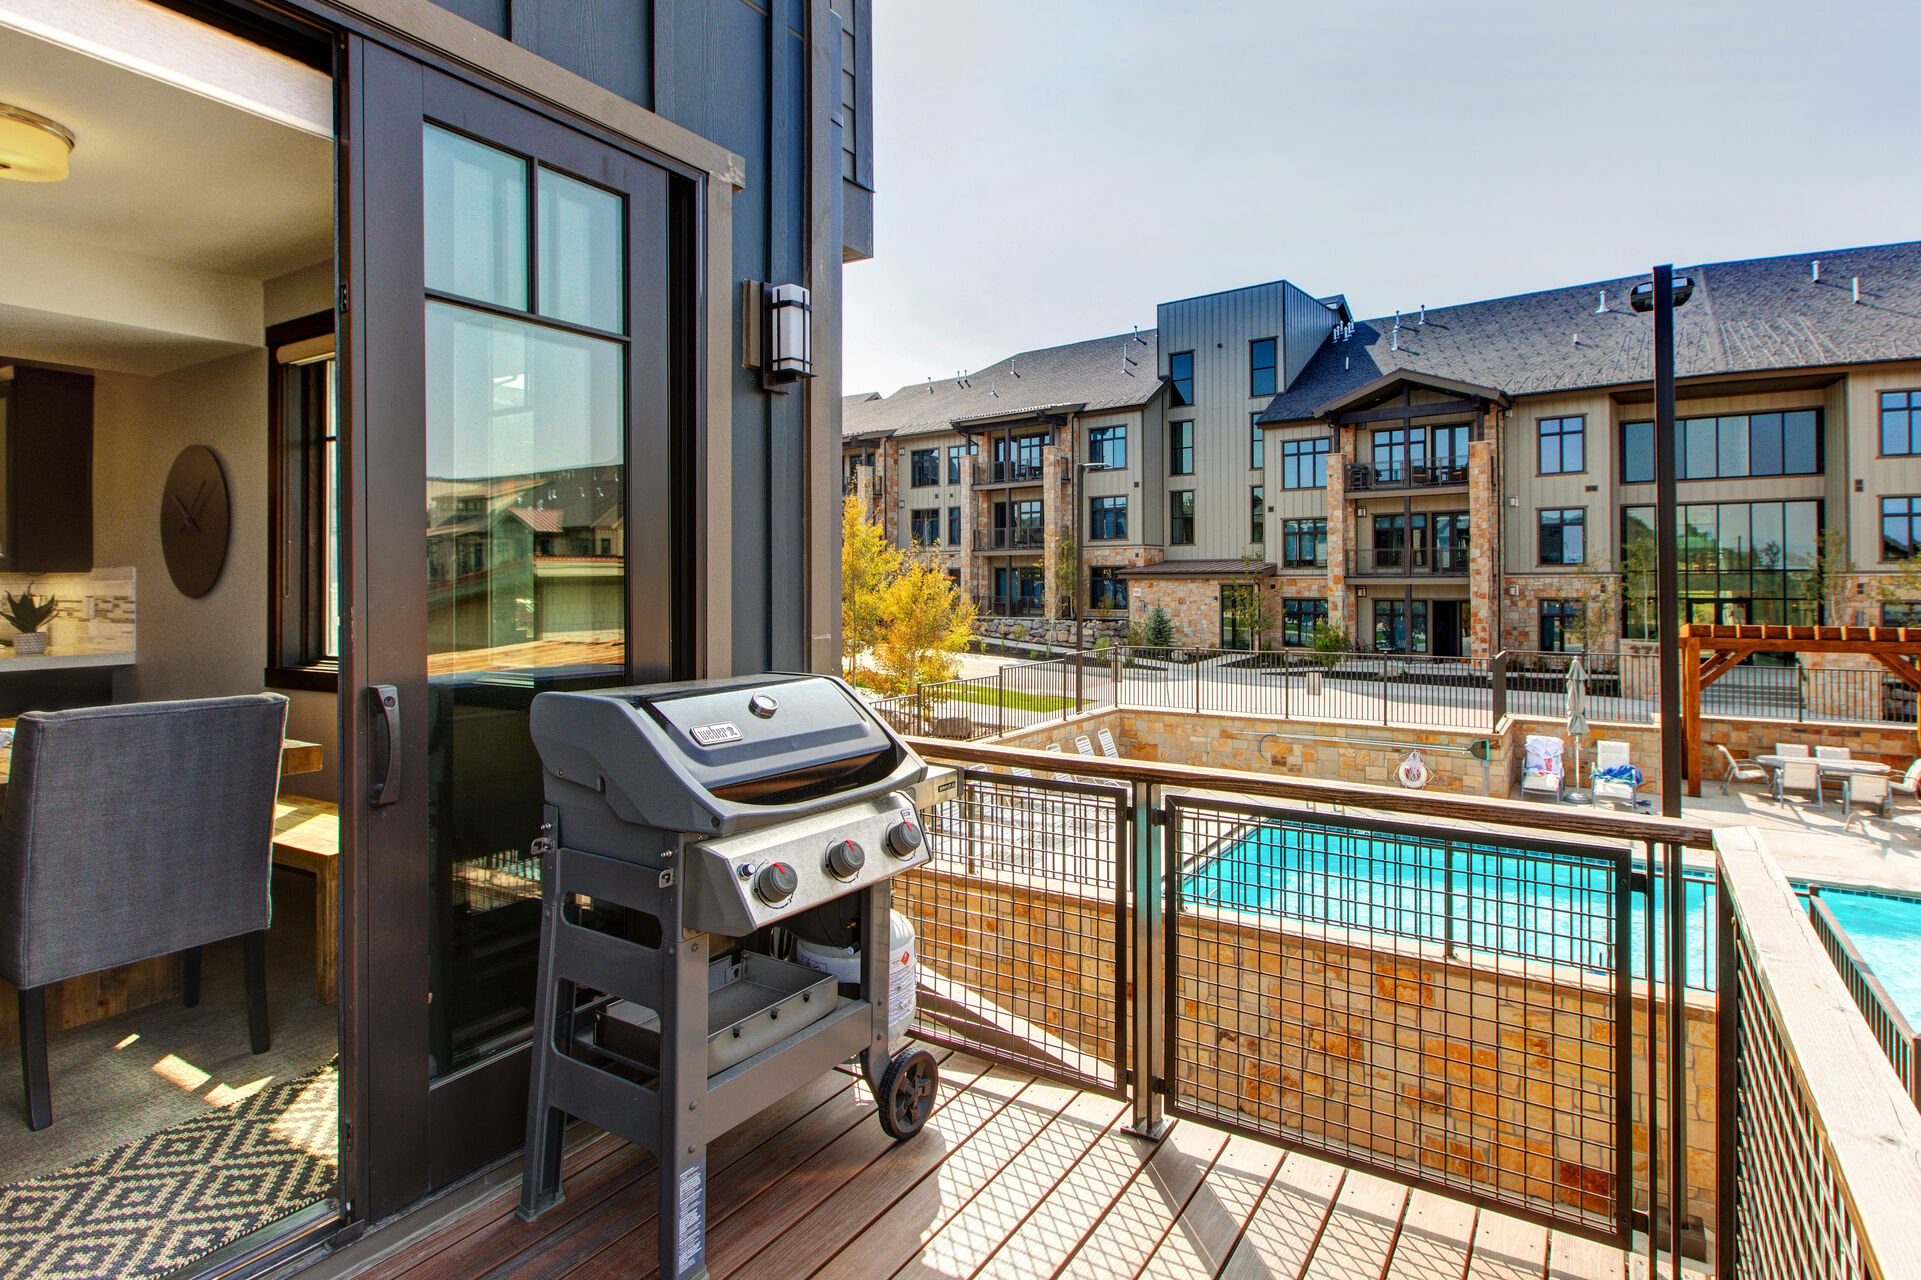 Balcony off the Dining Area with a BBQ Grill that Overlooks the Community Pool